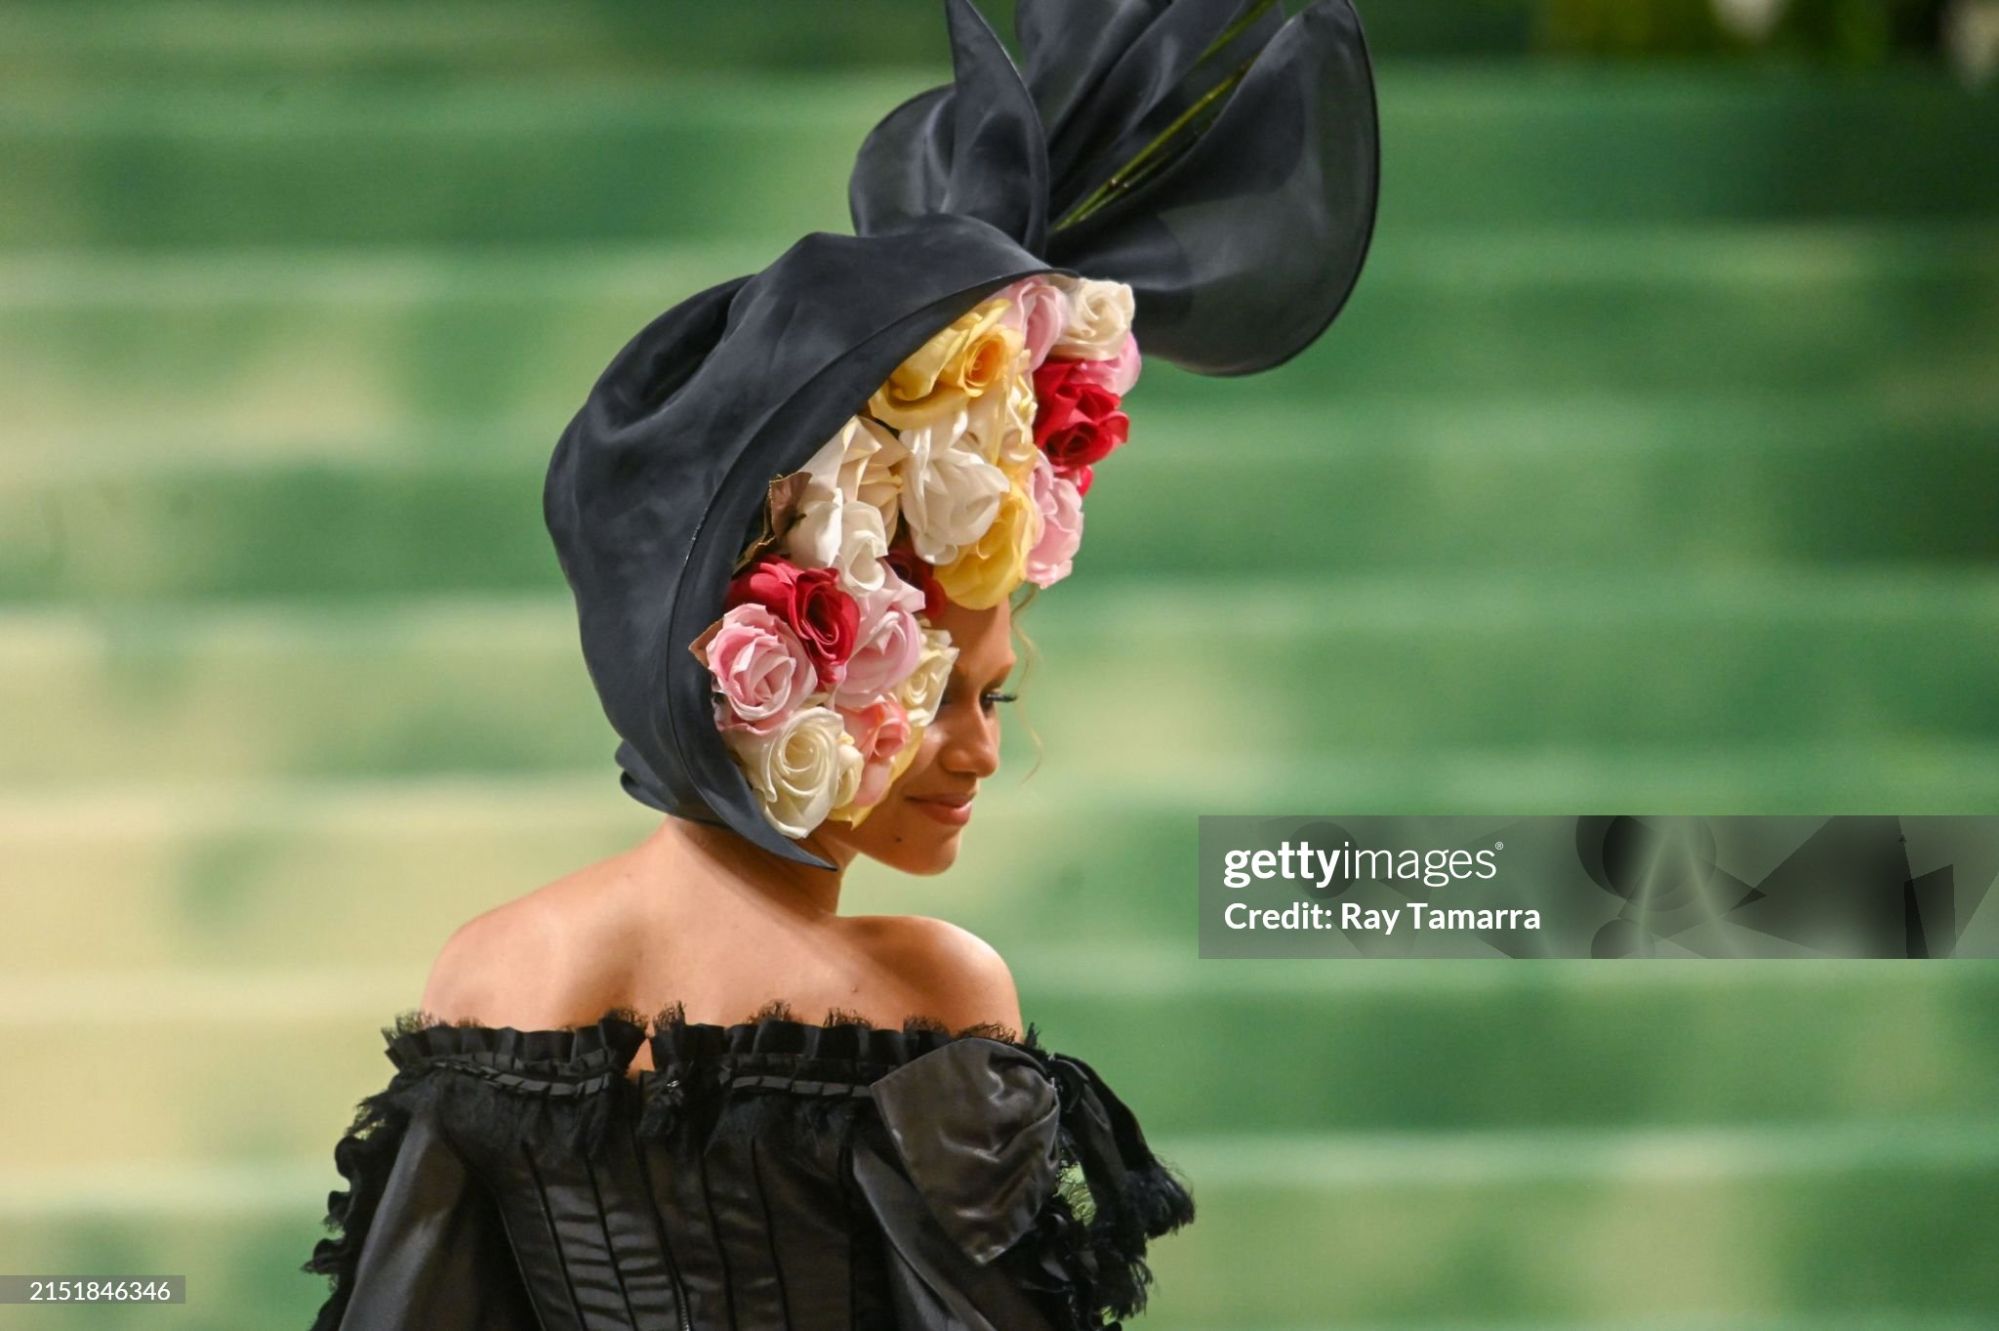 gettyimages-2151846346-2048x2048.jpg